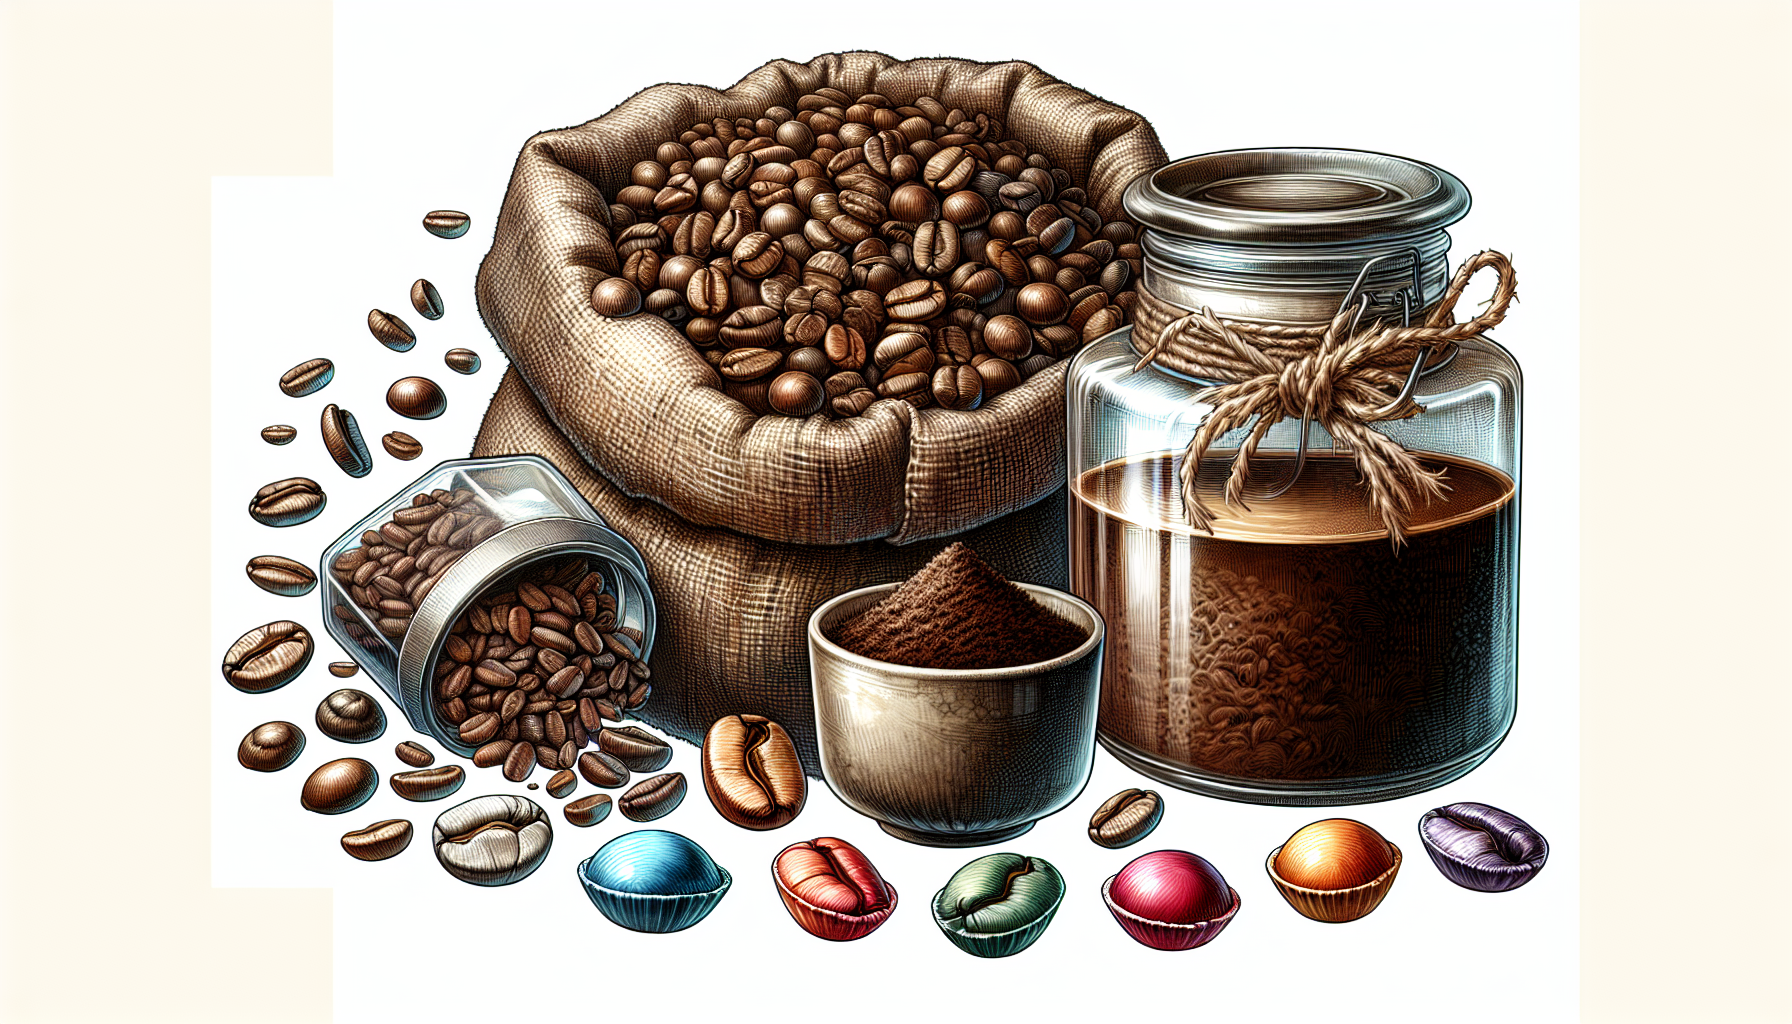 Illustration of a variety of coffee products to represent different types of coffee fundraisers.